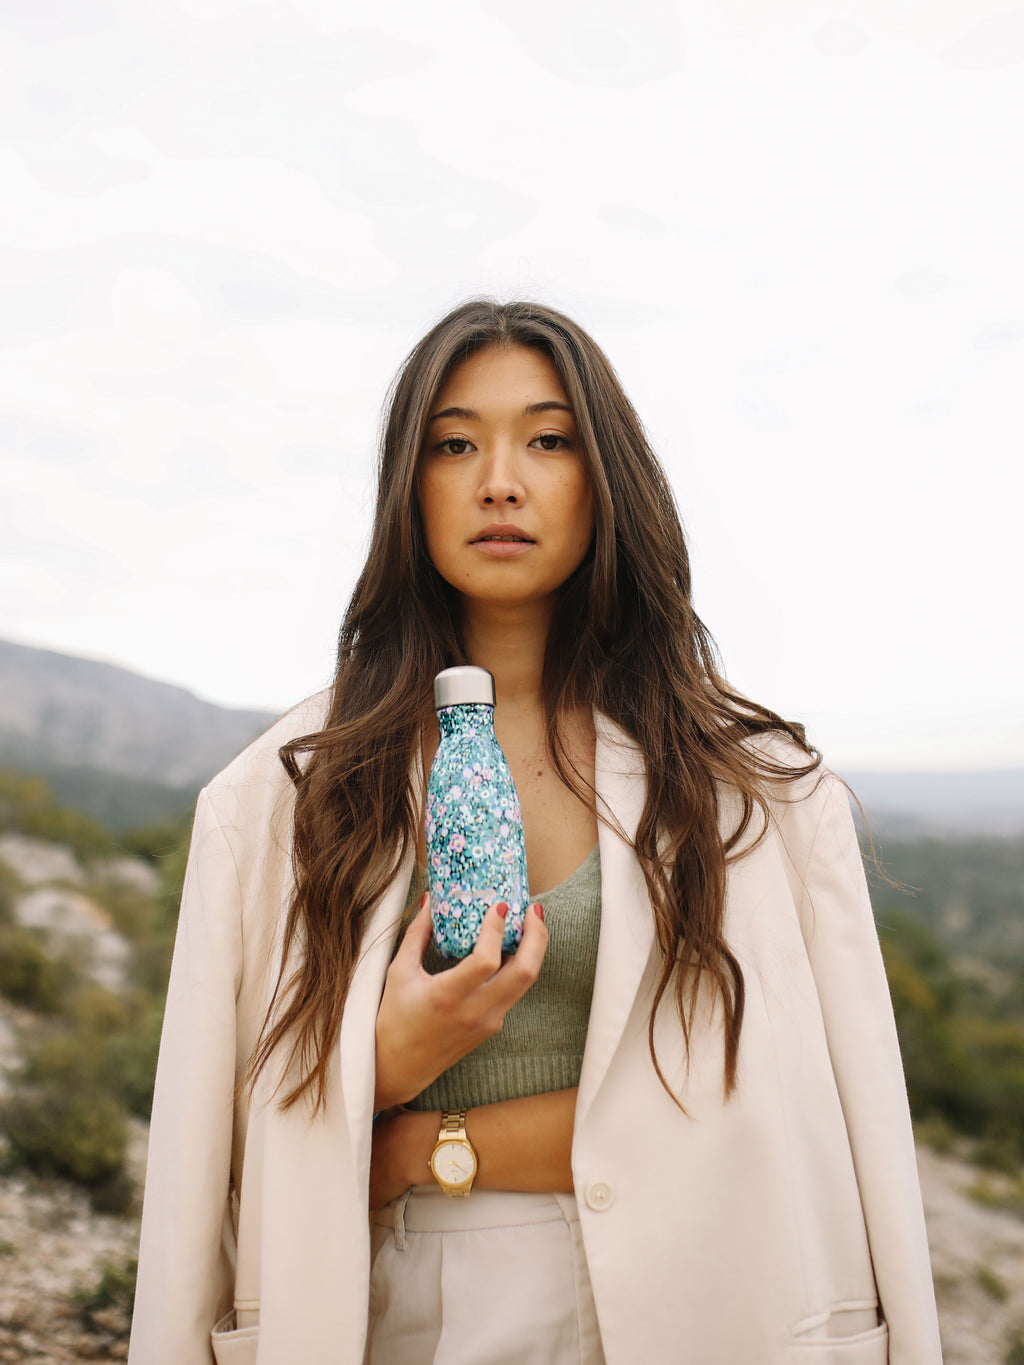 Insulated Bottle - Originals Giverny Wisteria